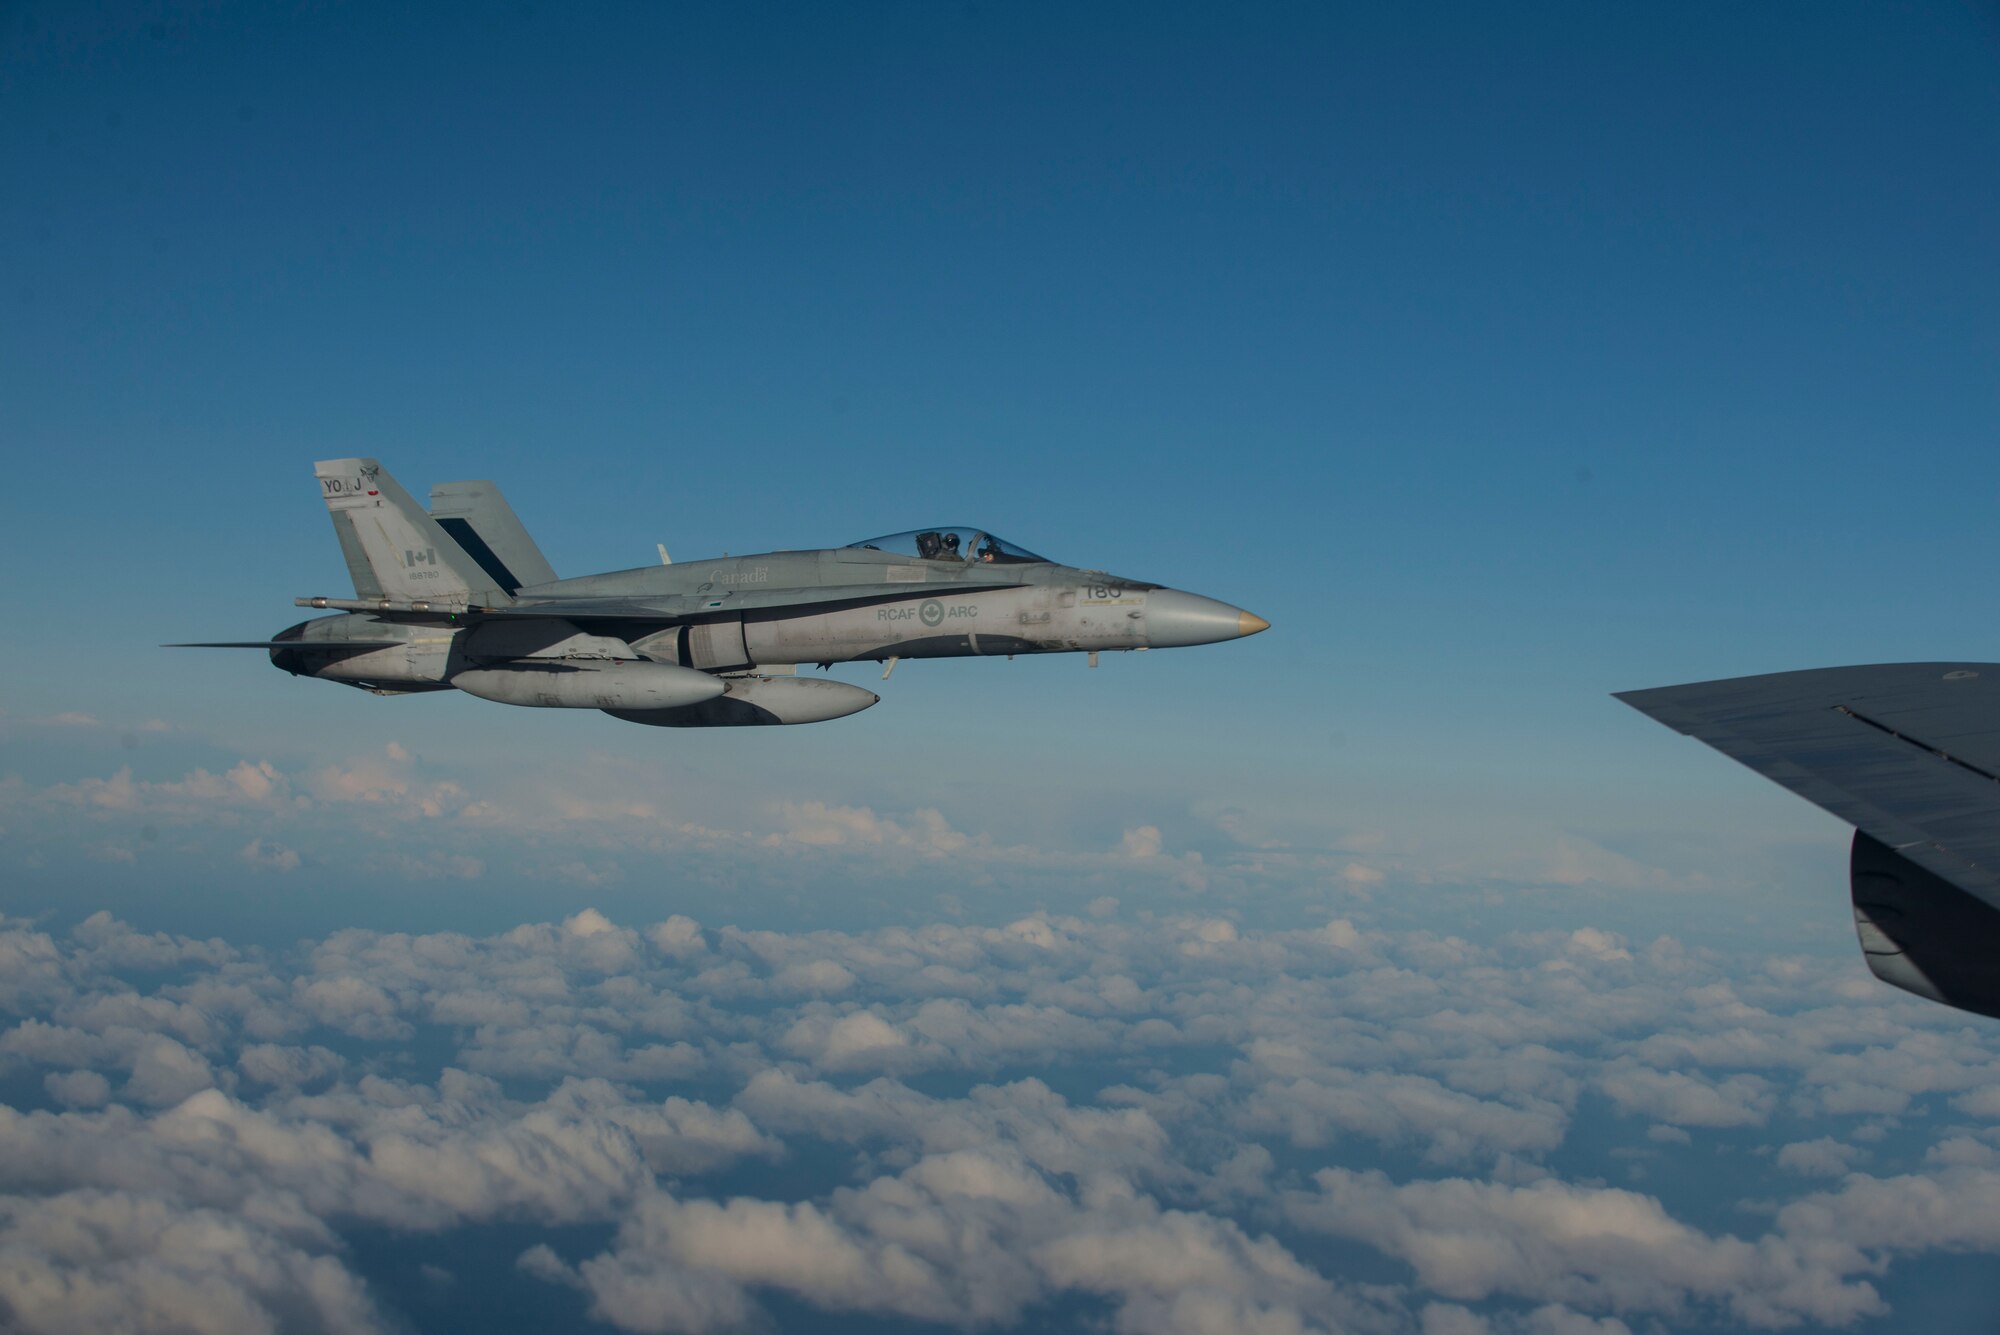 A Royal Canadian Air Force CF-188 Hornet flies alongside a U.S. Air Force KC-135 Stratotanker during Exercise Trident Juncture 18, off the coast of Norway, Oct. 27, 2018. Trident Juncture is the largest NATO exercise since 2015, with participation of more than 50,000 military members from 31 nations. The exercise provides U.S. forces with unique opportunities to train with NATO allies and partners. (U.S. Air Force photo by Senior Airman Luke Milano)